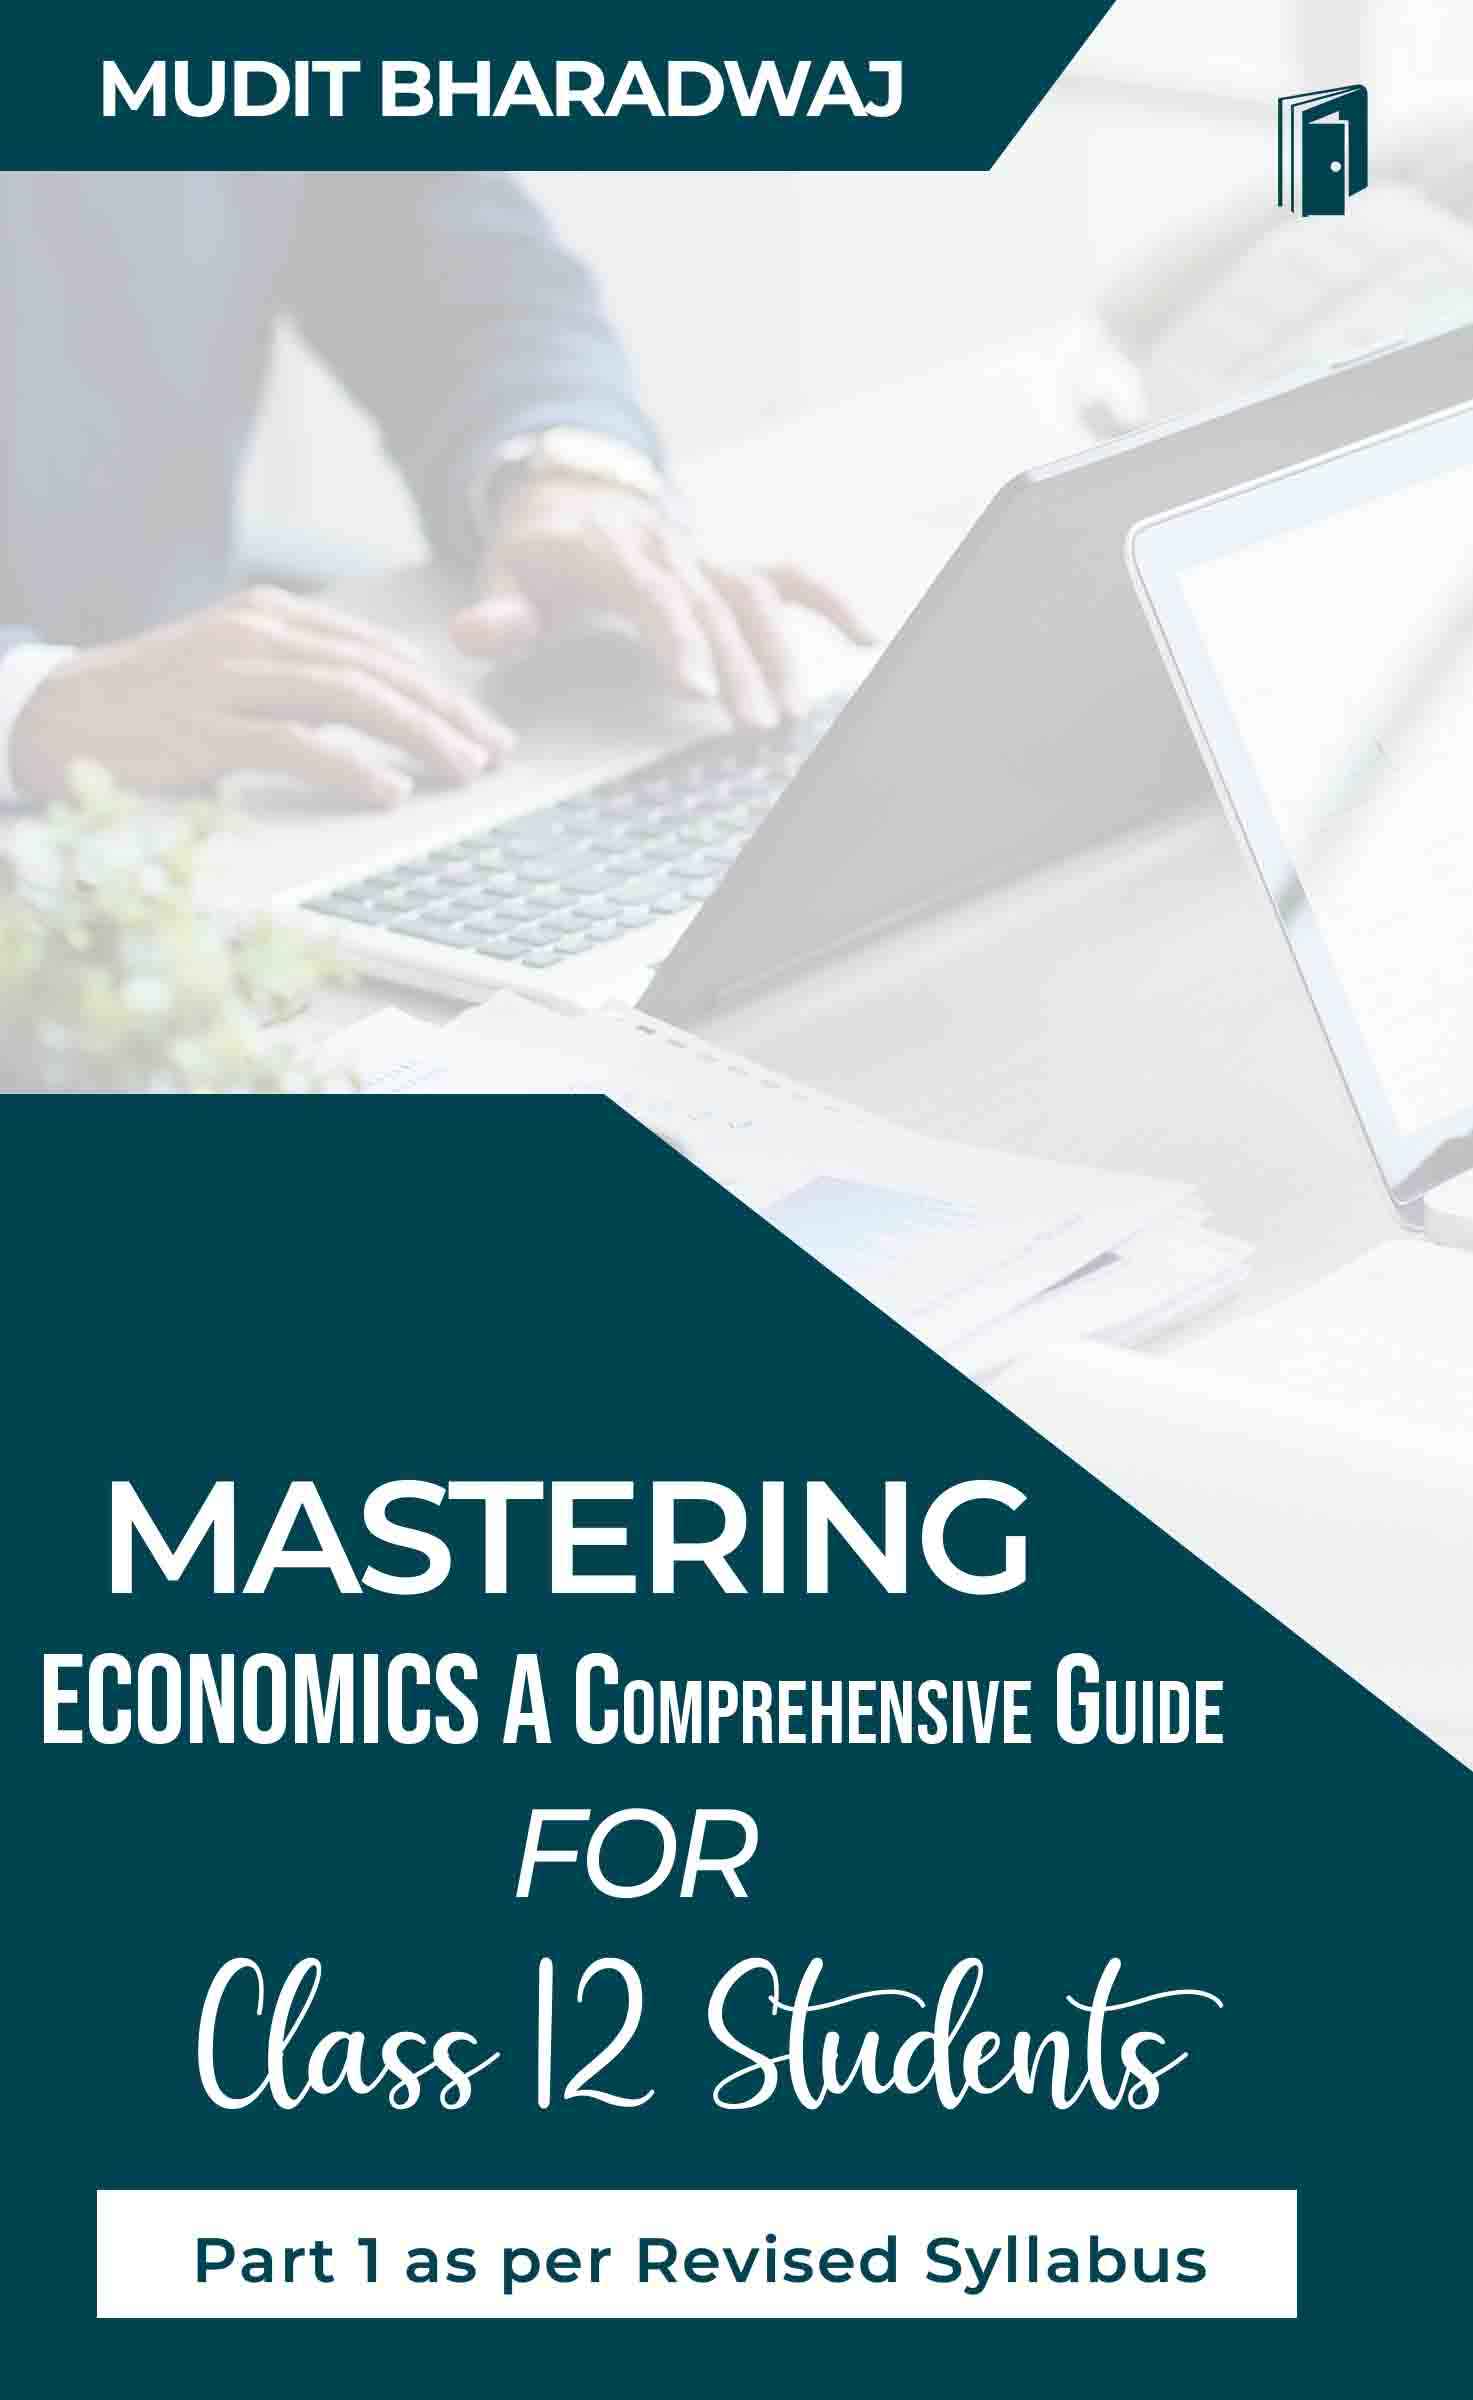 MASTERING ECONOMICS A COMPREHENSIVE GUIDE FOR CLASS 12 STUDENTS